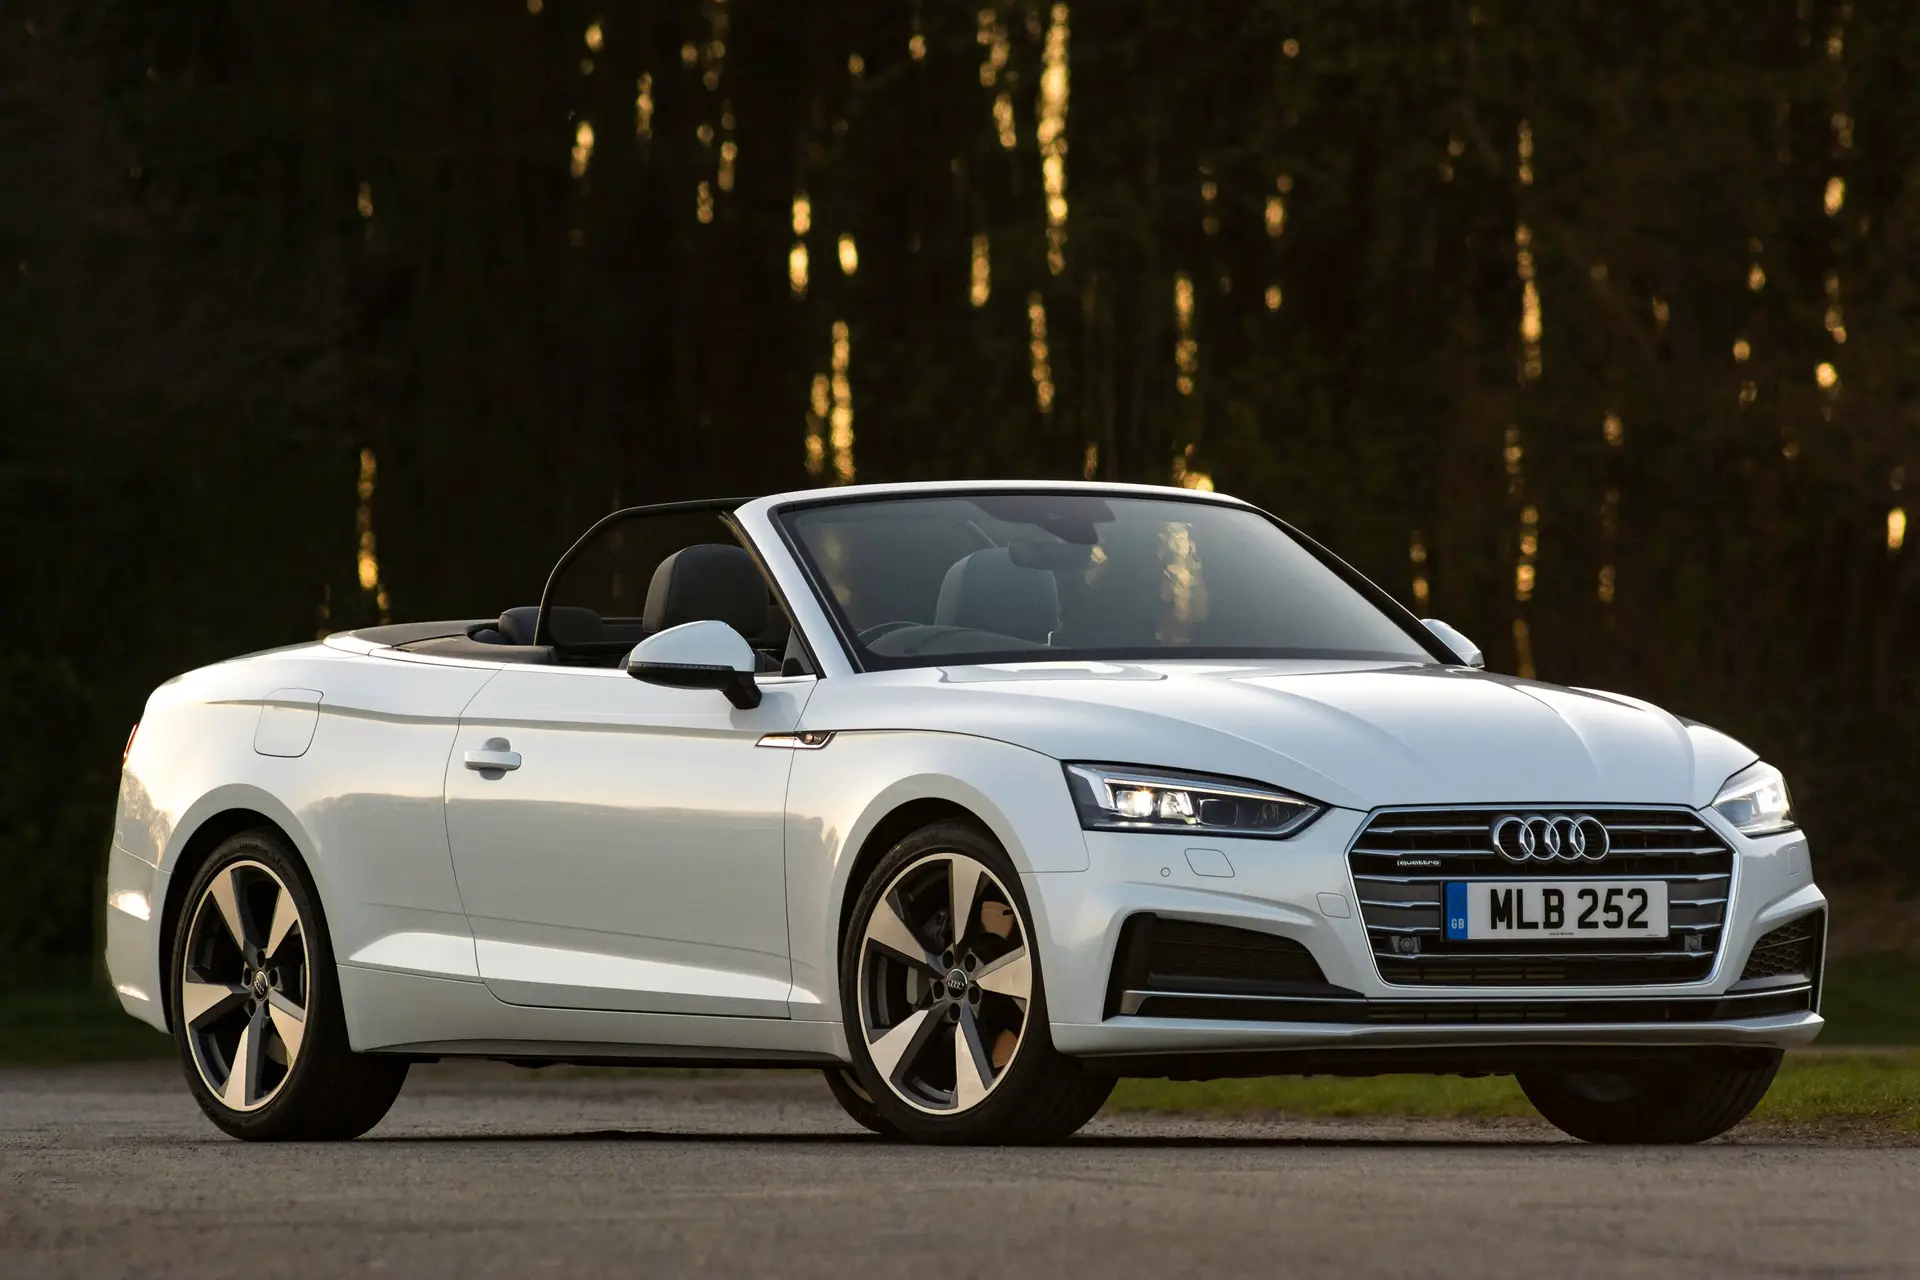 Audi A5 Cabriolet Review 2023: exterior front three quarter photo of the Audi A5 Cabriolet